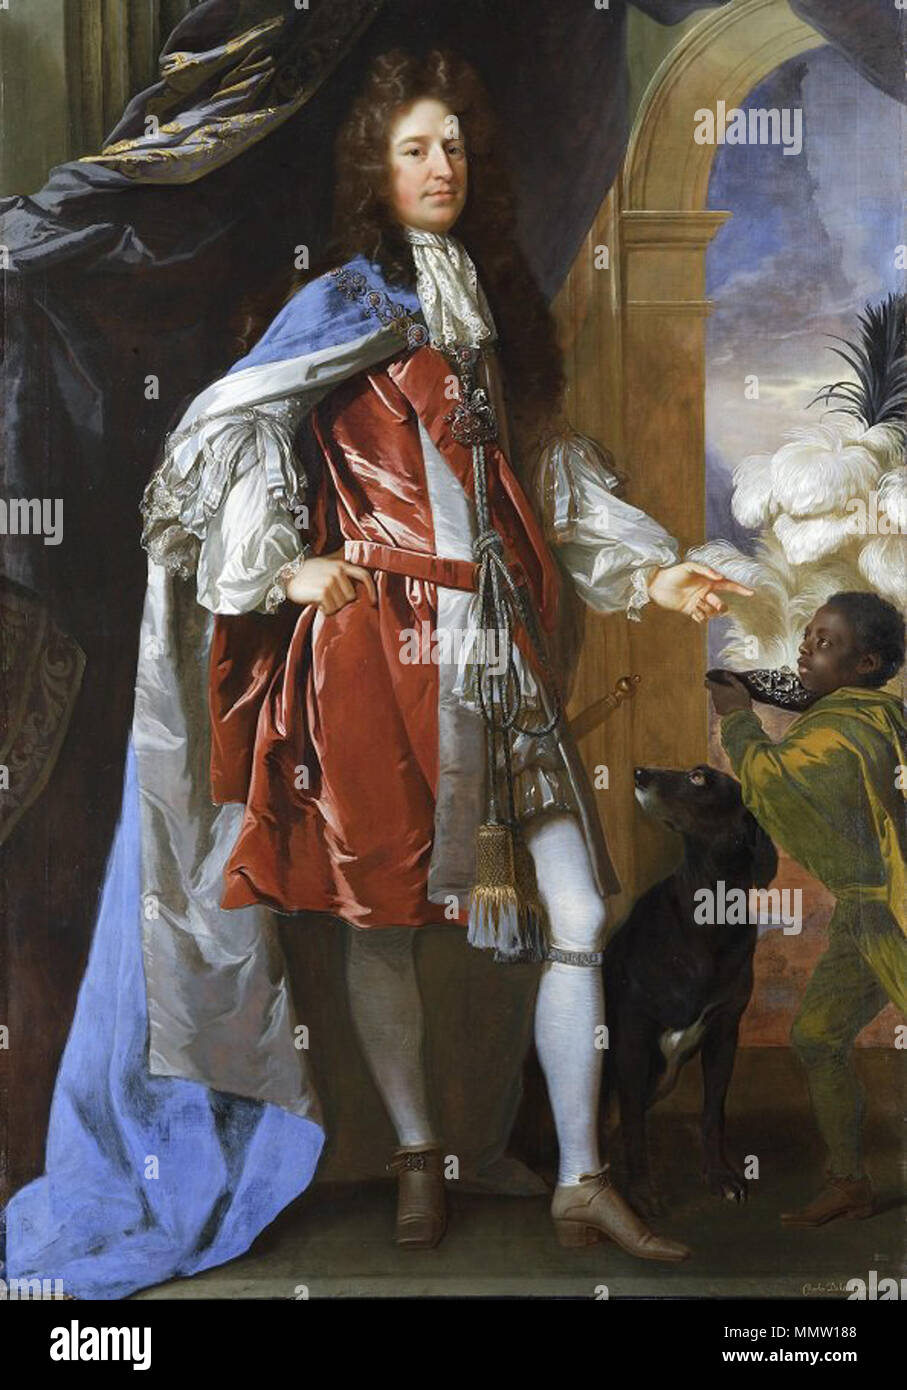 .  English: Charles Seymour, 6th Duke of Somerset, KG, (1662–1748), of Petworth House, with a black pageboy. On his left leg he displays The Garter. Collection of National Trust, Petworth House, Sussex, accepted by HM Treasury, 1956, in lieu of death duties on the estate of Charles Henry Wyndham, 3rd Lord Leconfield, of Petworth House; transferred to the National Trust  . circa 1690–1692. CharlesSeymour 6thDukeOfSomerset ByJohn Closterman PetworthHouse Stock Photo